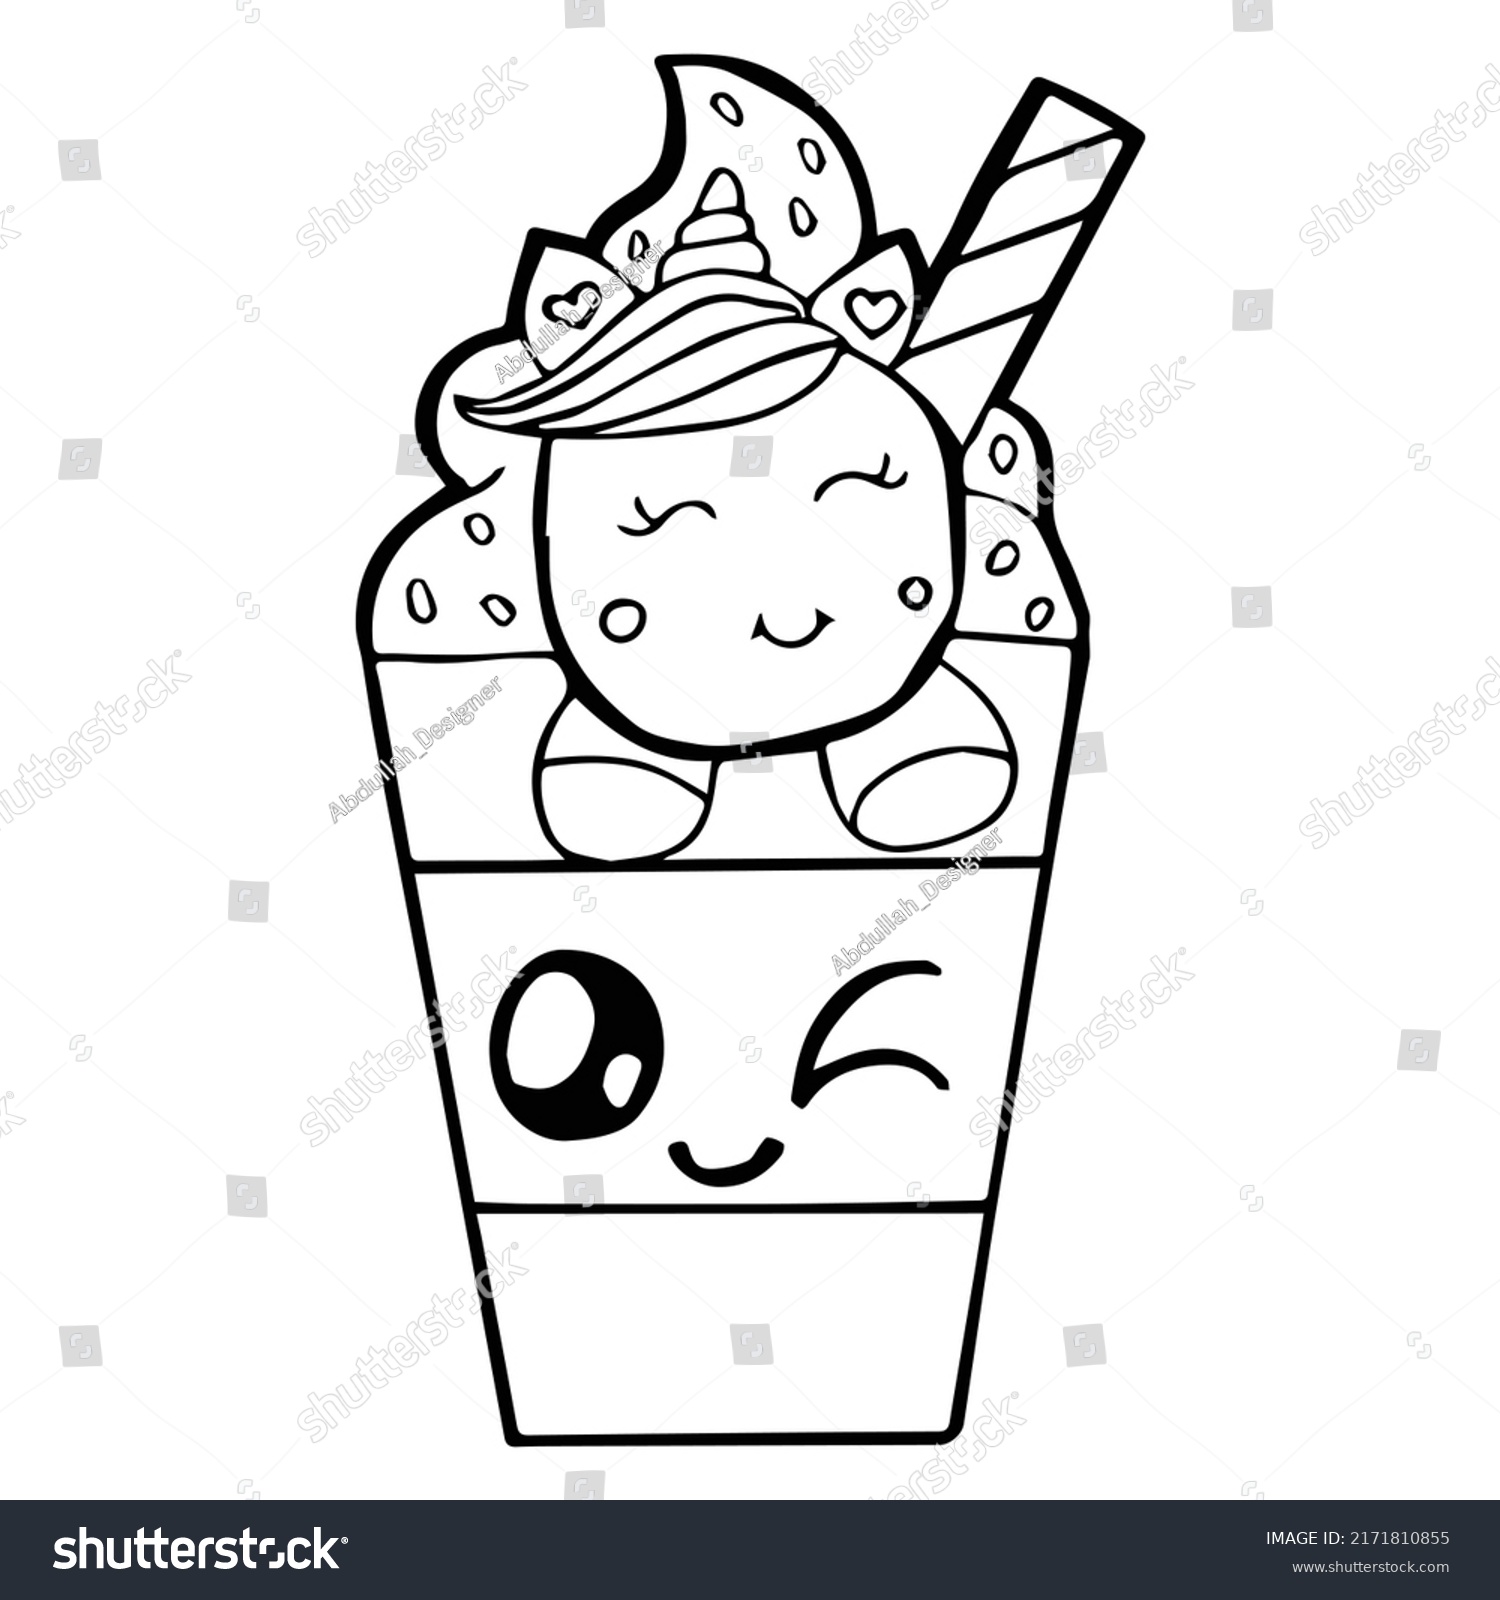 Kids coloring pages cute unicorn cup stock vector royalty free